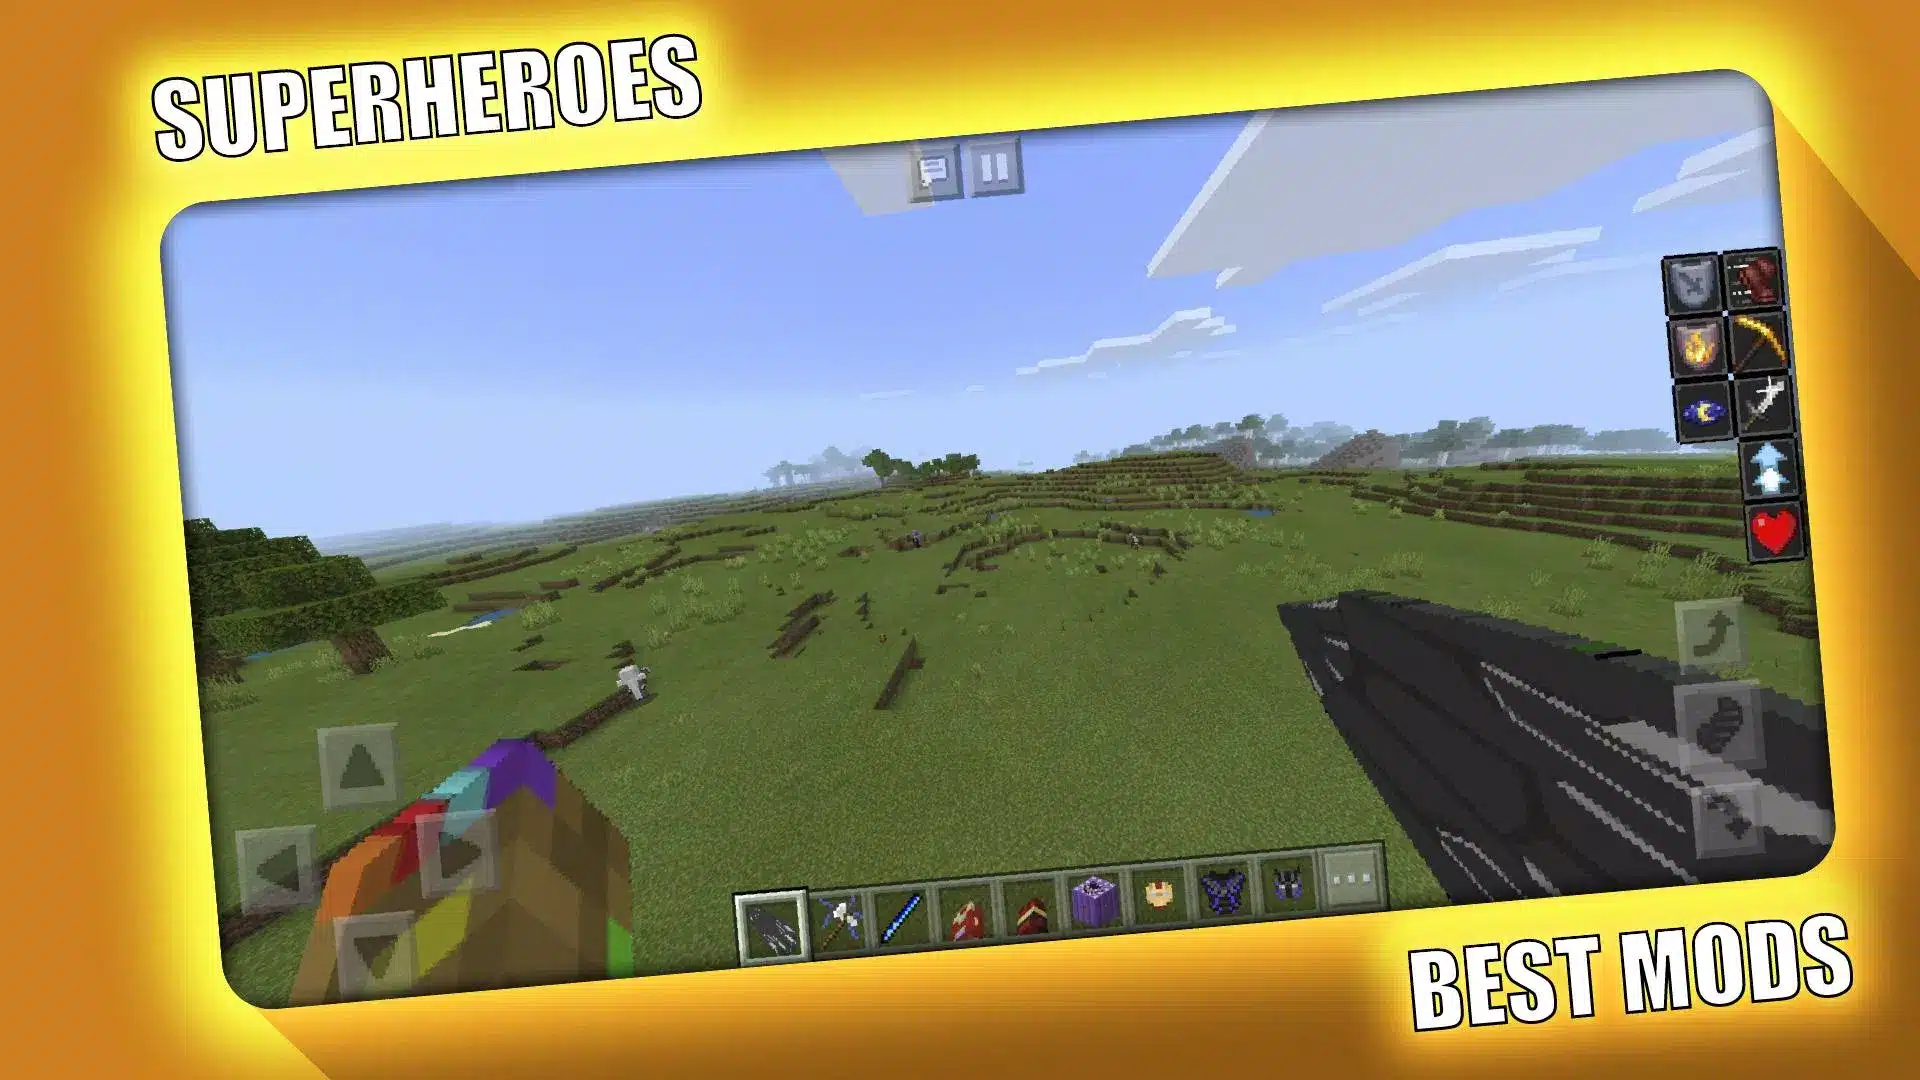 Superheroes Mod for Minecraft Image 4